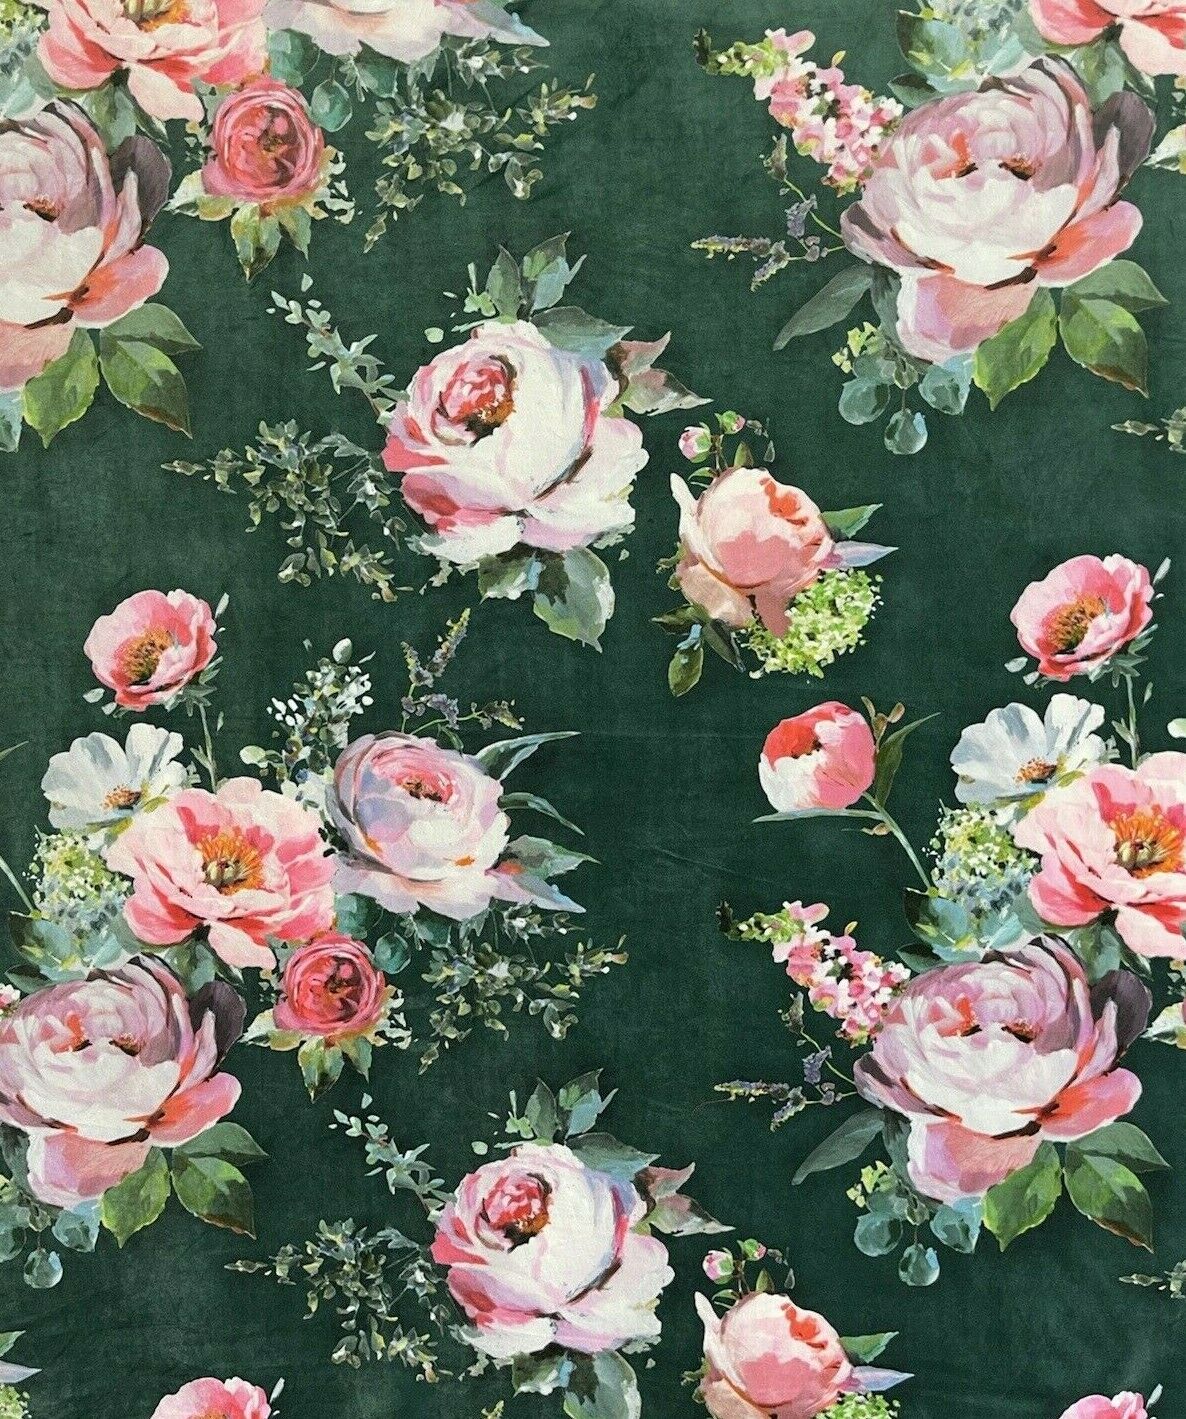 Pink Roses Italian Velvet Printed Fabric Green Floral Painting Deluxe by Meter